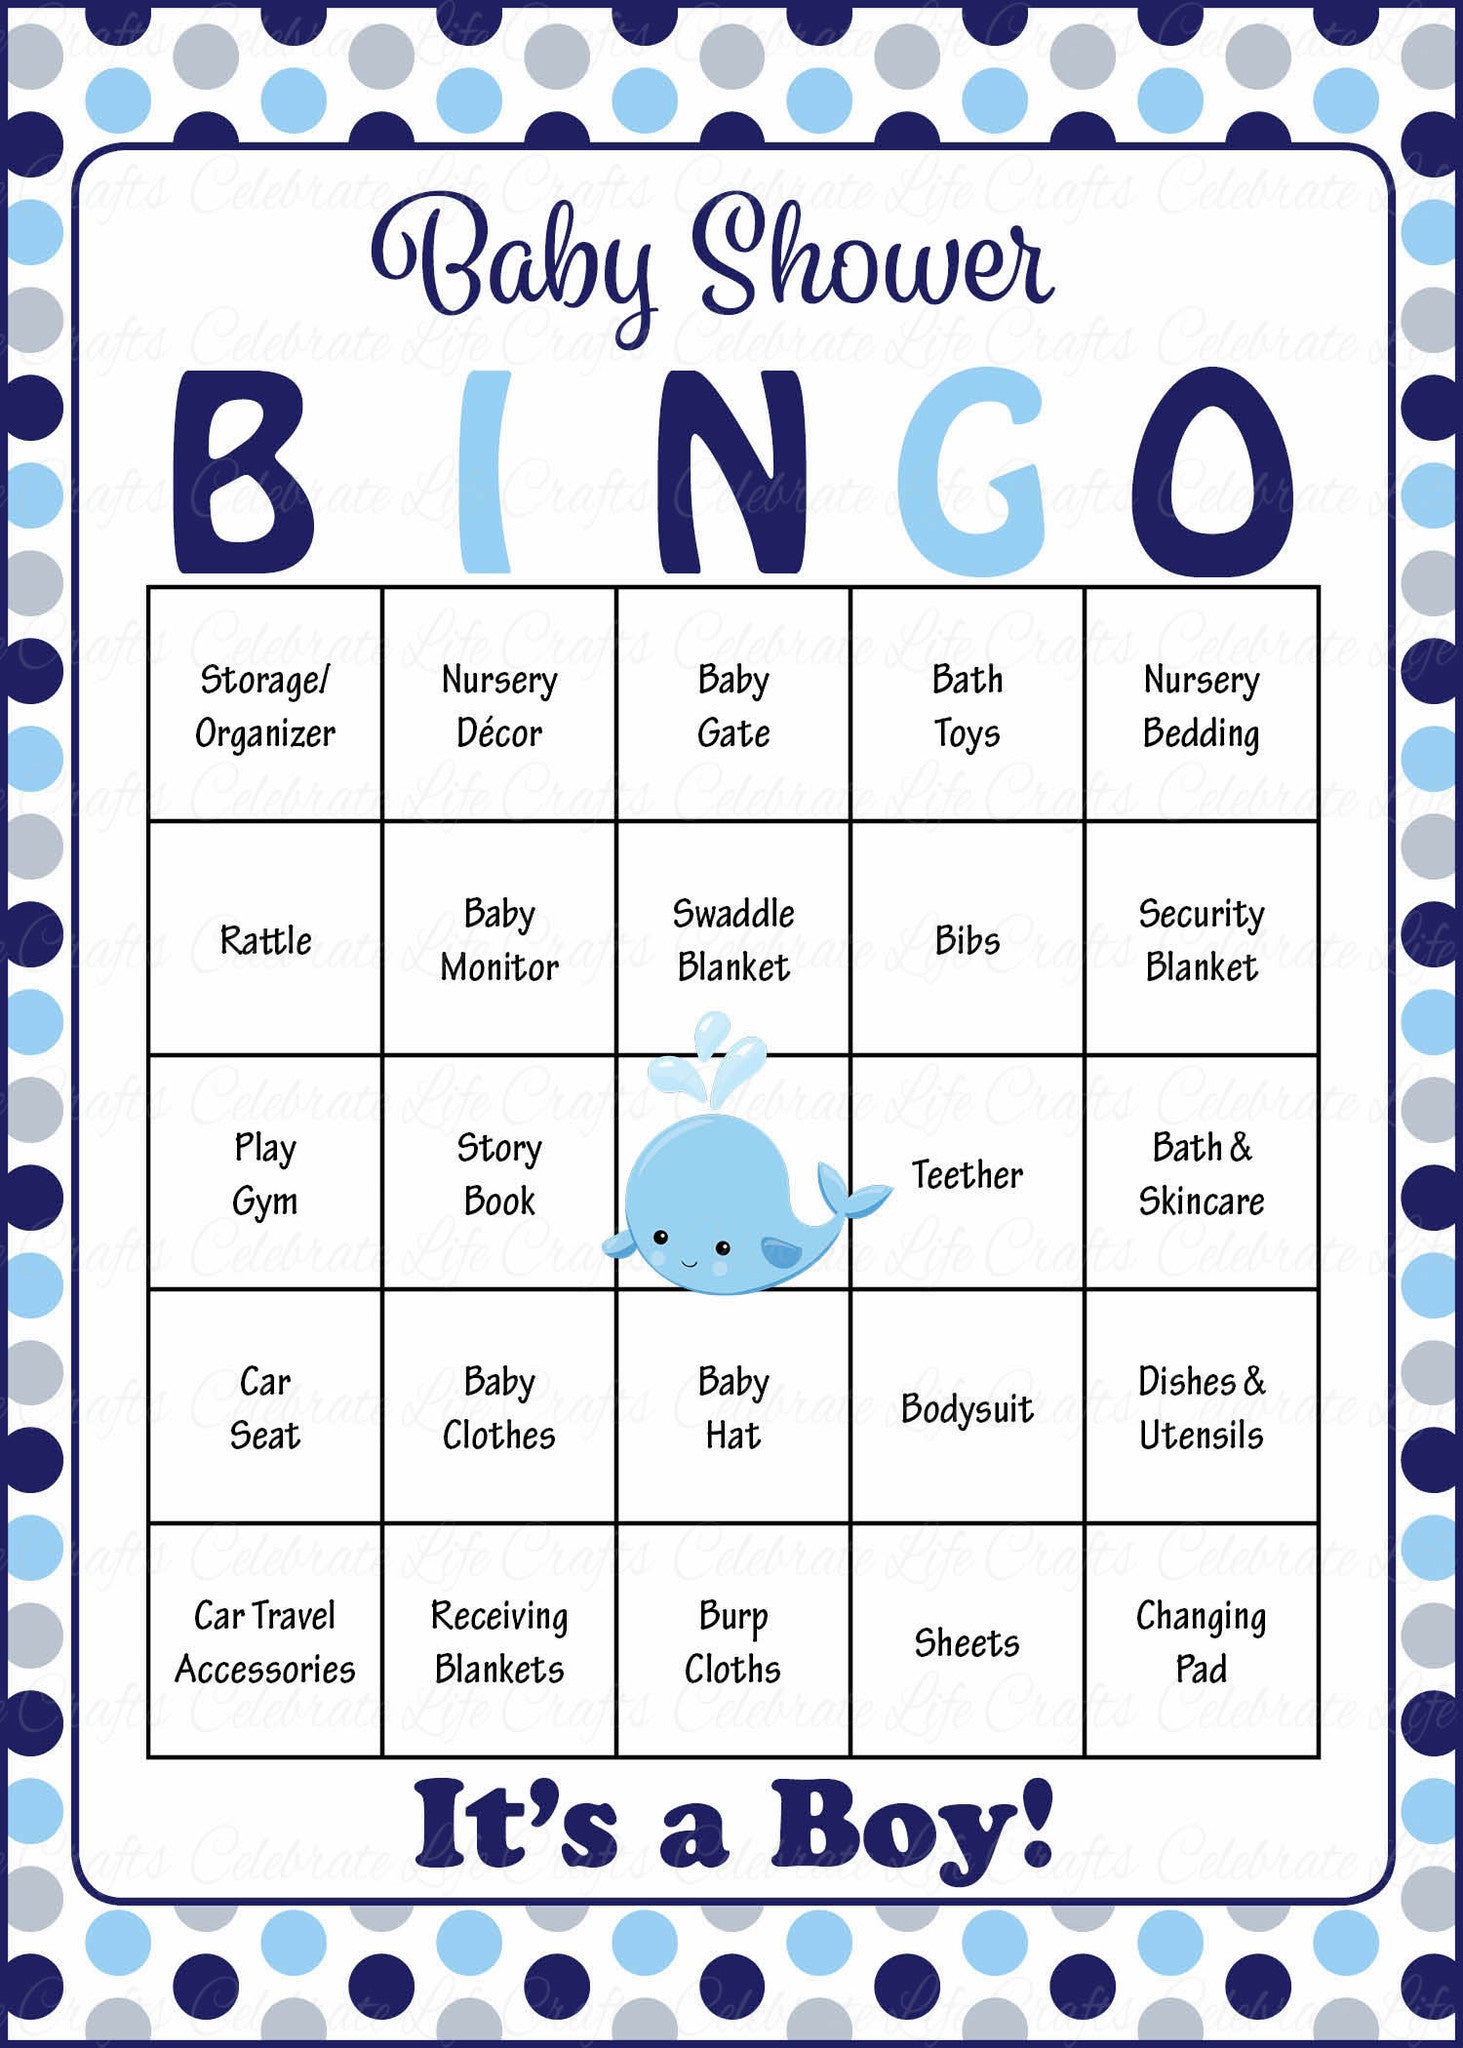 whale-baby-shower-game-download-for-boy-baby-bingo-celebrate-life